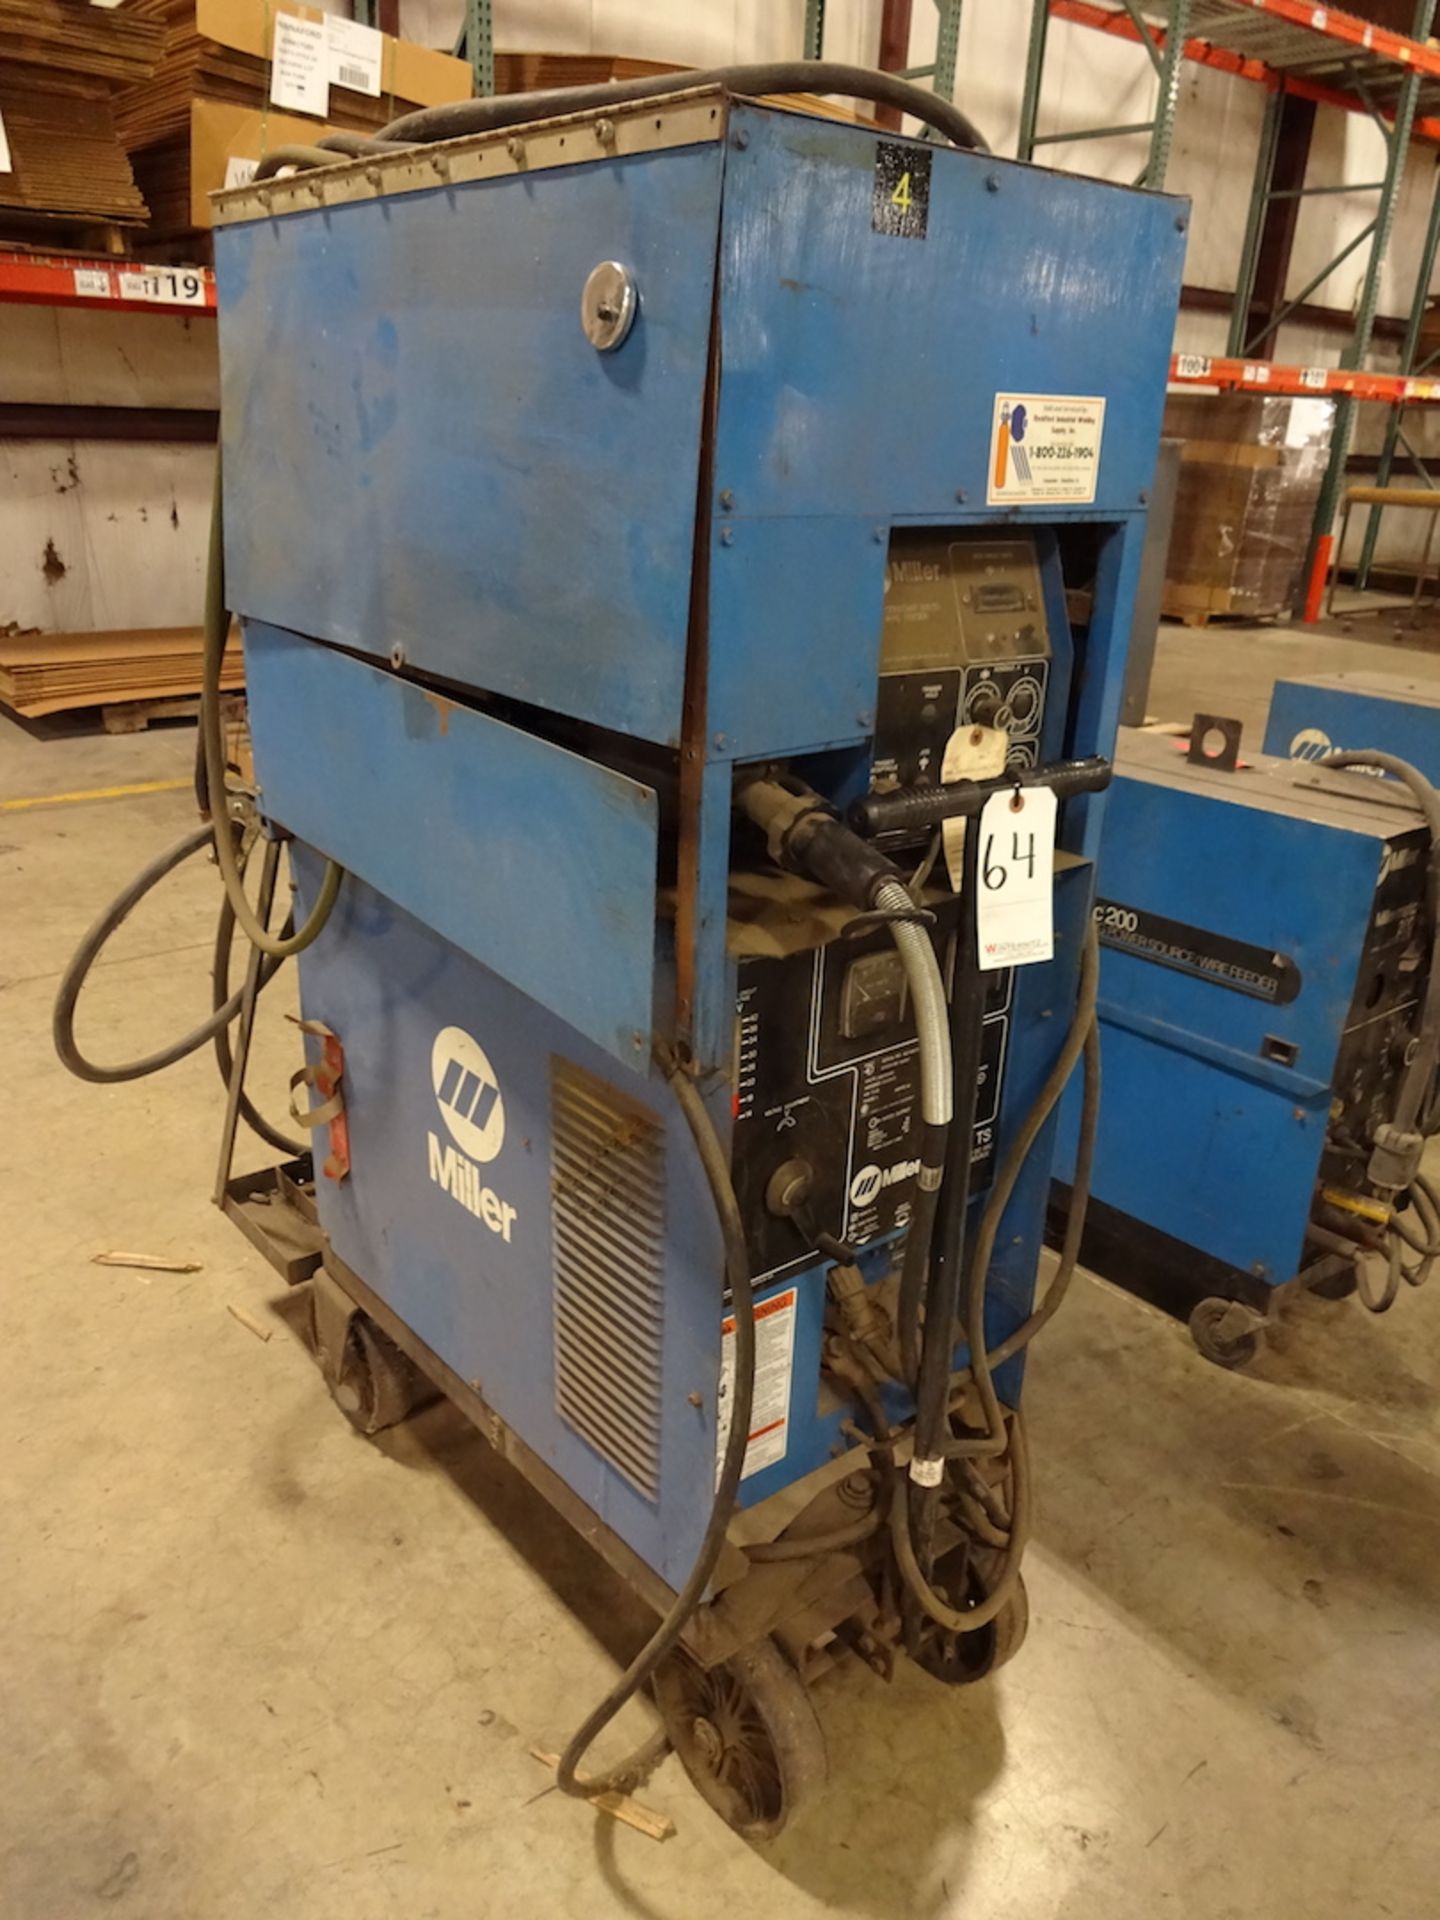 Miller 250 Amp Model CP-250TS Constant Voltage DC Arc Welding Power Source, S/N KE744810, with